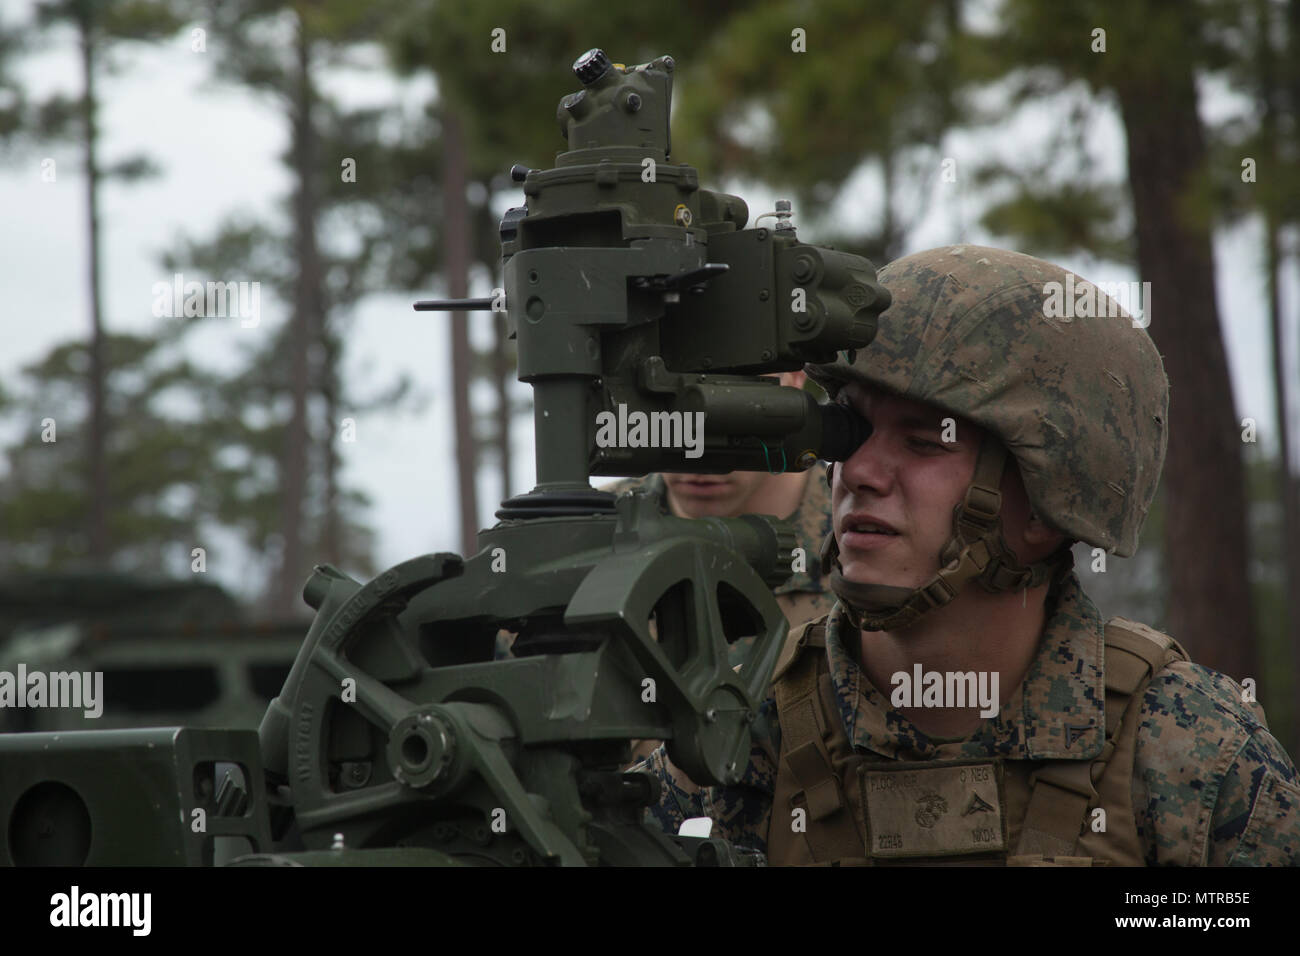 Lance Cpl. Christopher Ploof aims down the sight of an M777A2 towed 155mm howitzer at Camp Lejeune, N.C., Jan. 18, 2017. Ploof is attending the Artillery Training School as part of a certification course to become a gunner for the howitzer, which takes approximately two weeks to complete. Ploof is a field artillery cannoneer with 1st Battalion, 10th Marine Regiment, 2nd Marine Division. (U.S. Marine Corps photo by Lance Cpl. Juan A Soto-Delgado) Stock Photo